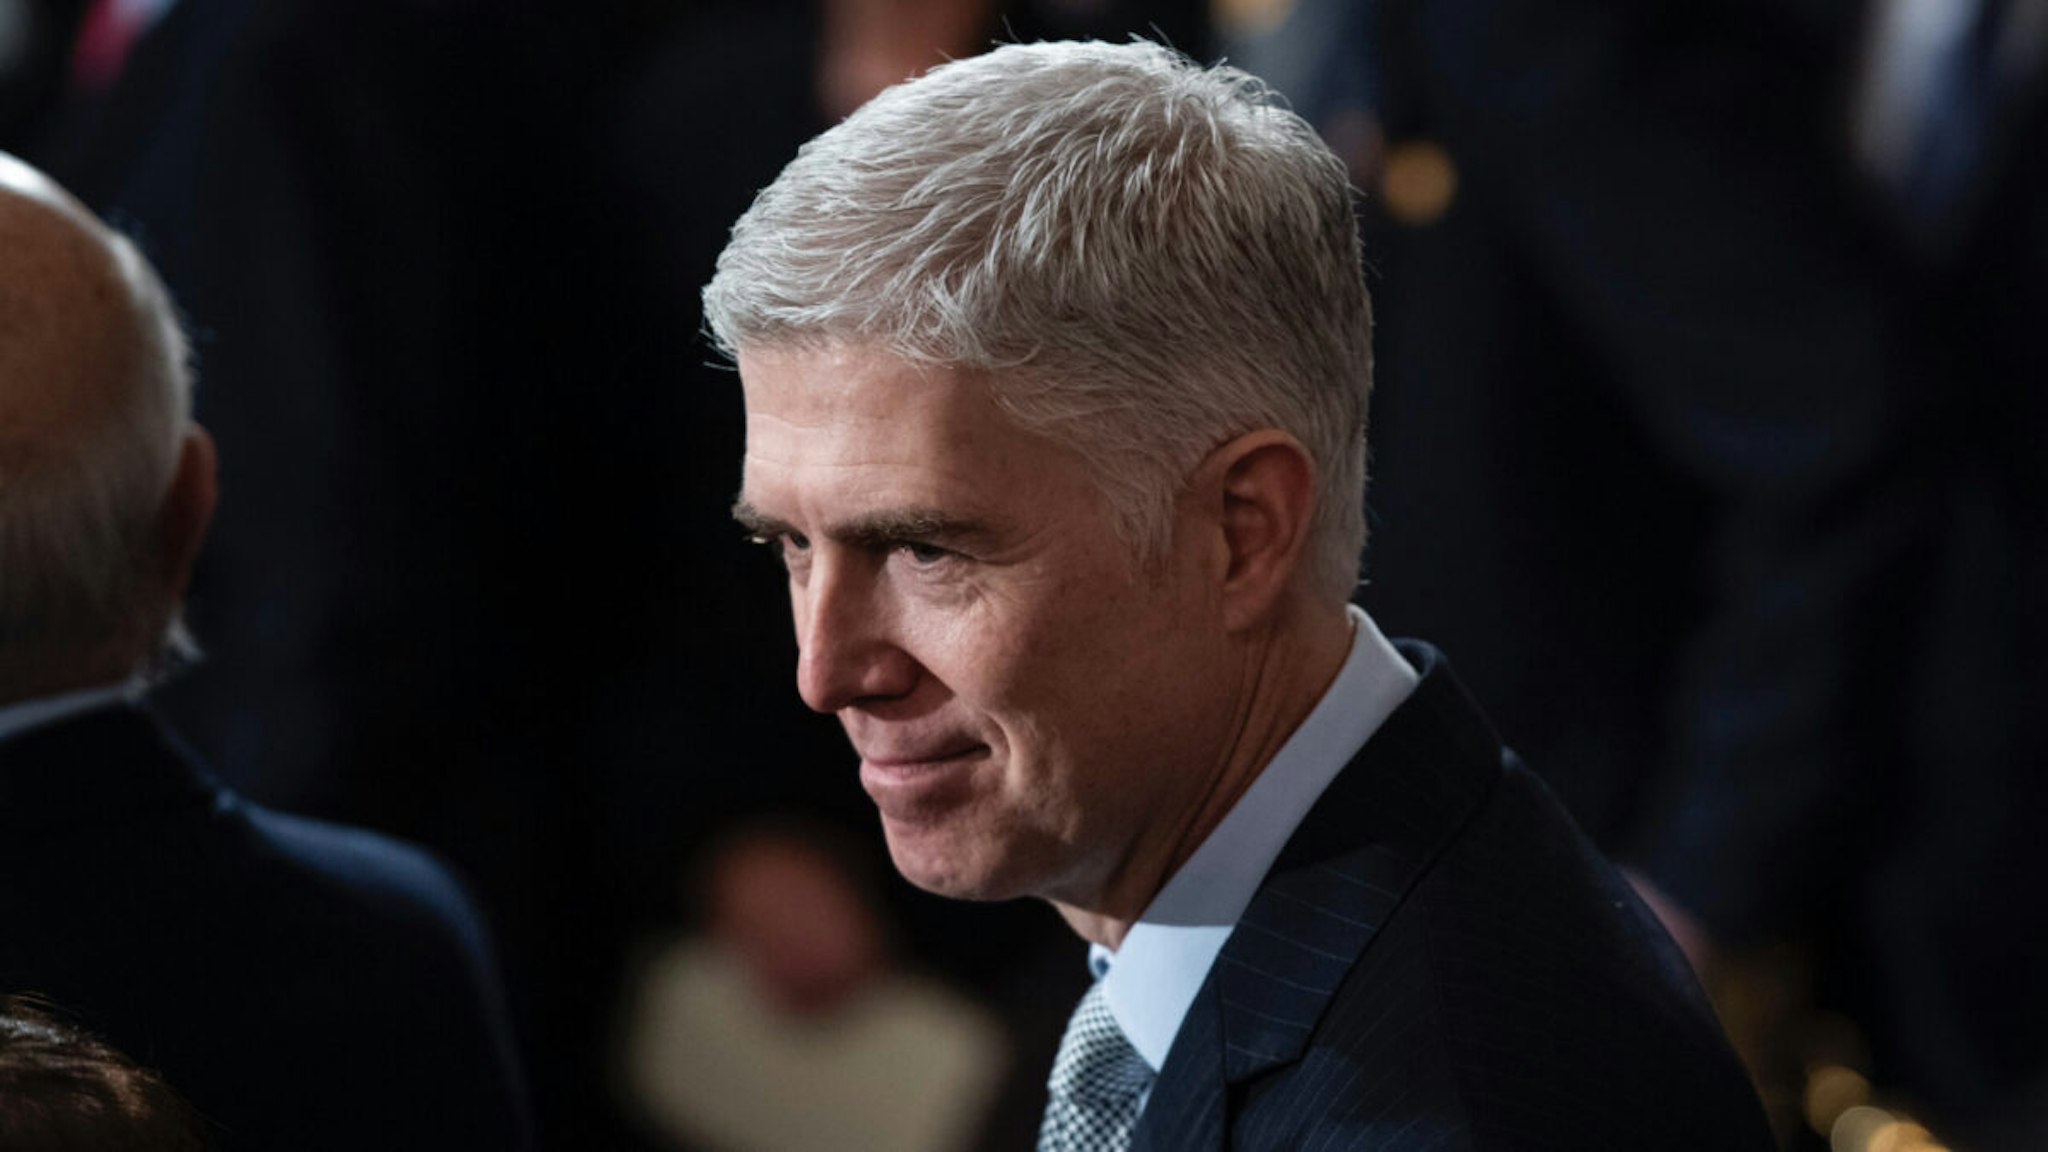 U.S. Supreme Court Associate Justice Neil M. Gorsuch waits for the arrival of former U.S. President George H.W. Bush at the U.S Capitol Rotunda on December 03, 2018 in Washington, DC.